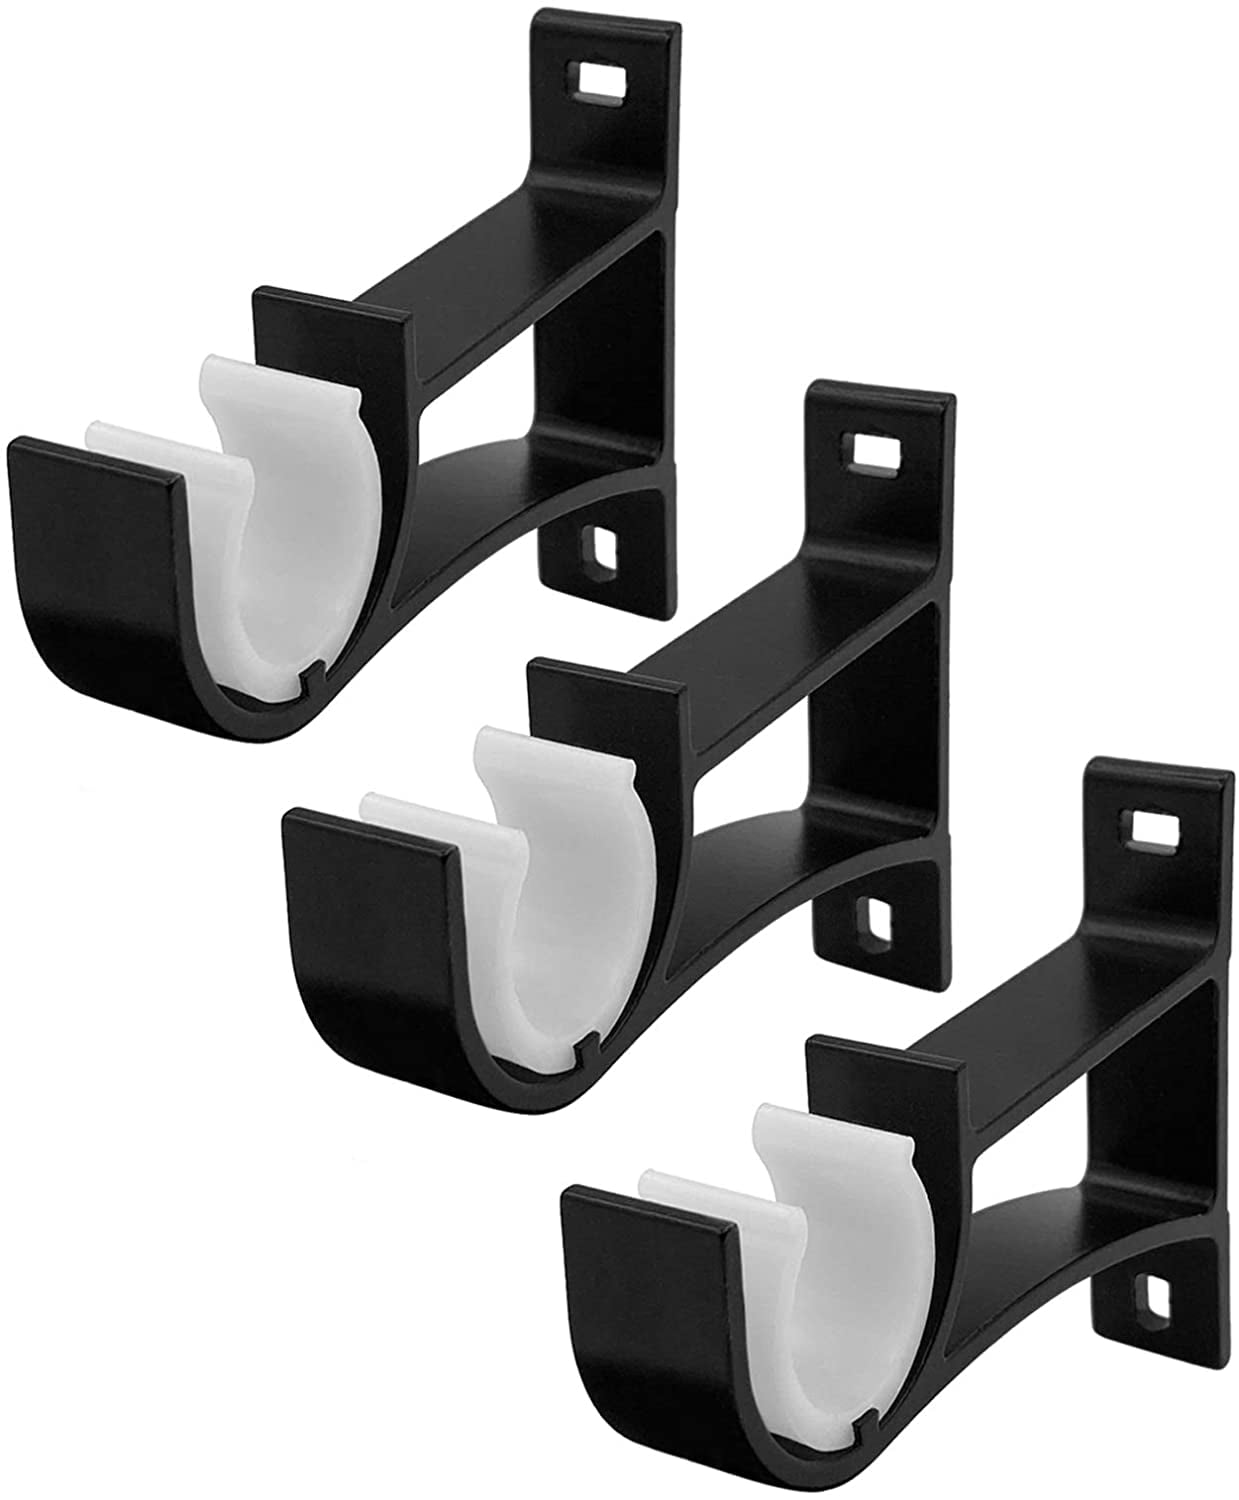 Details about   Curtain Rod Bracket Window Curtain Rod  Frame Holders Bracket Into Single Hang 